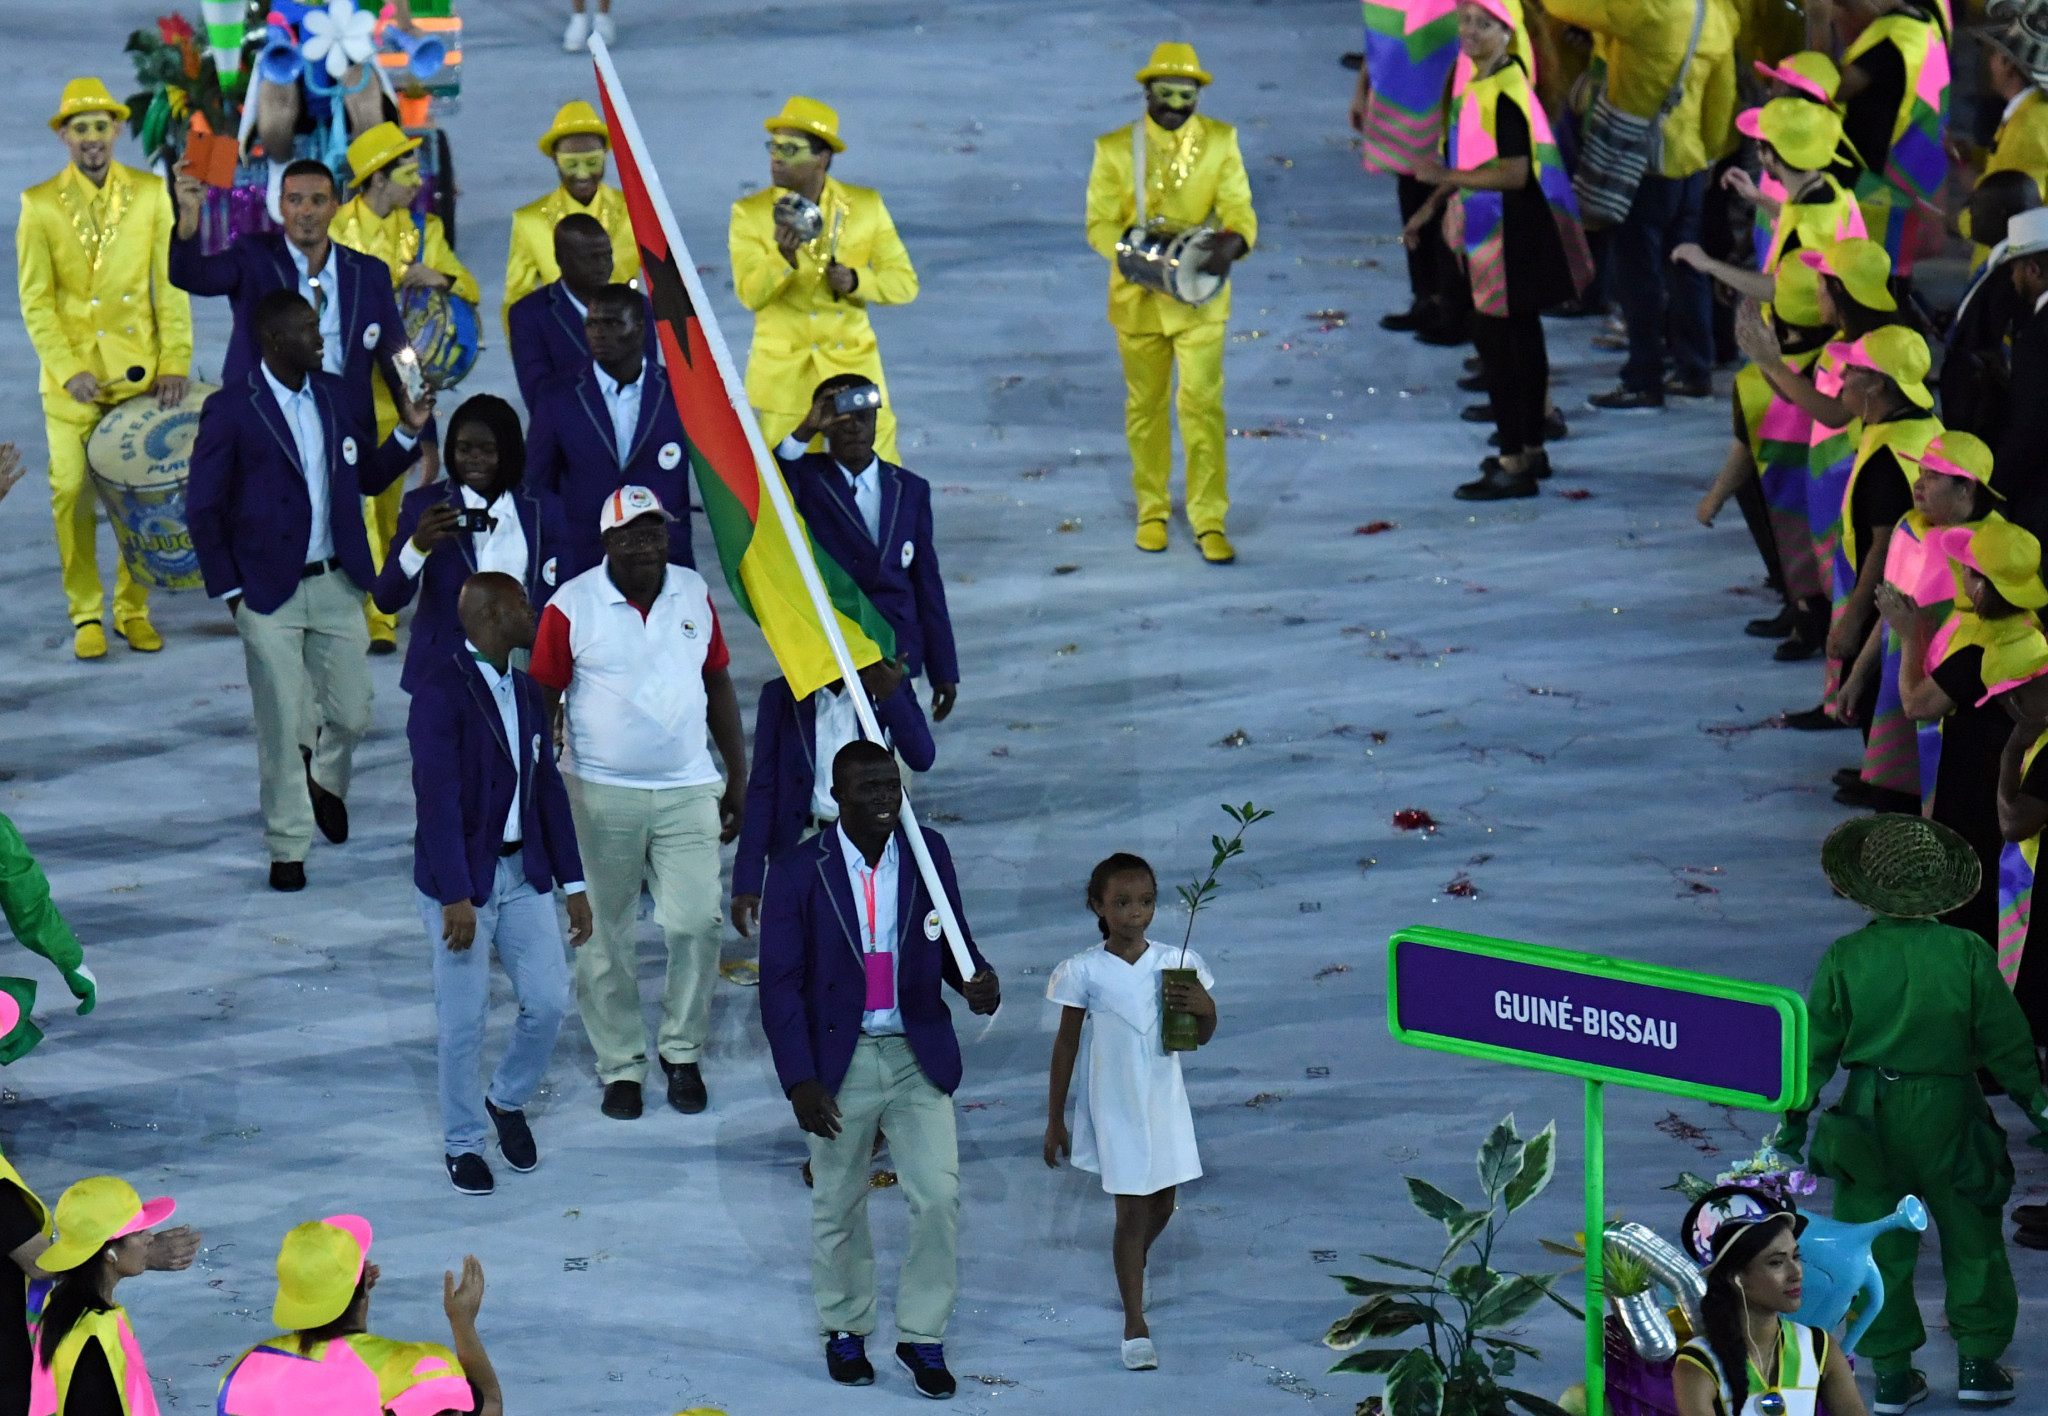 Guinea-Bissau first appeared at the Olympics at Atlanta 1996 ©Getty Images